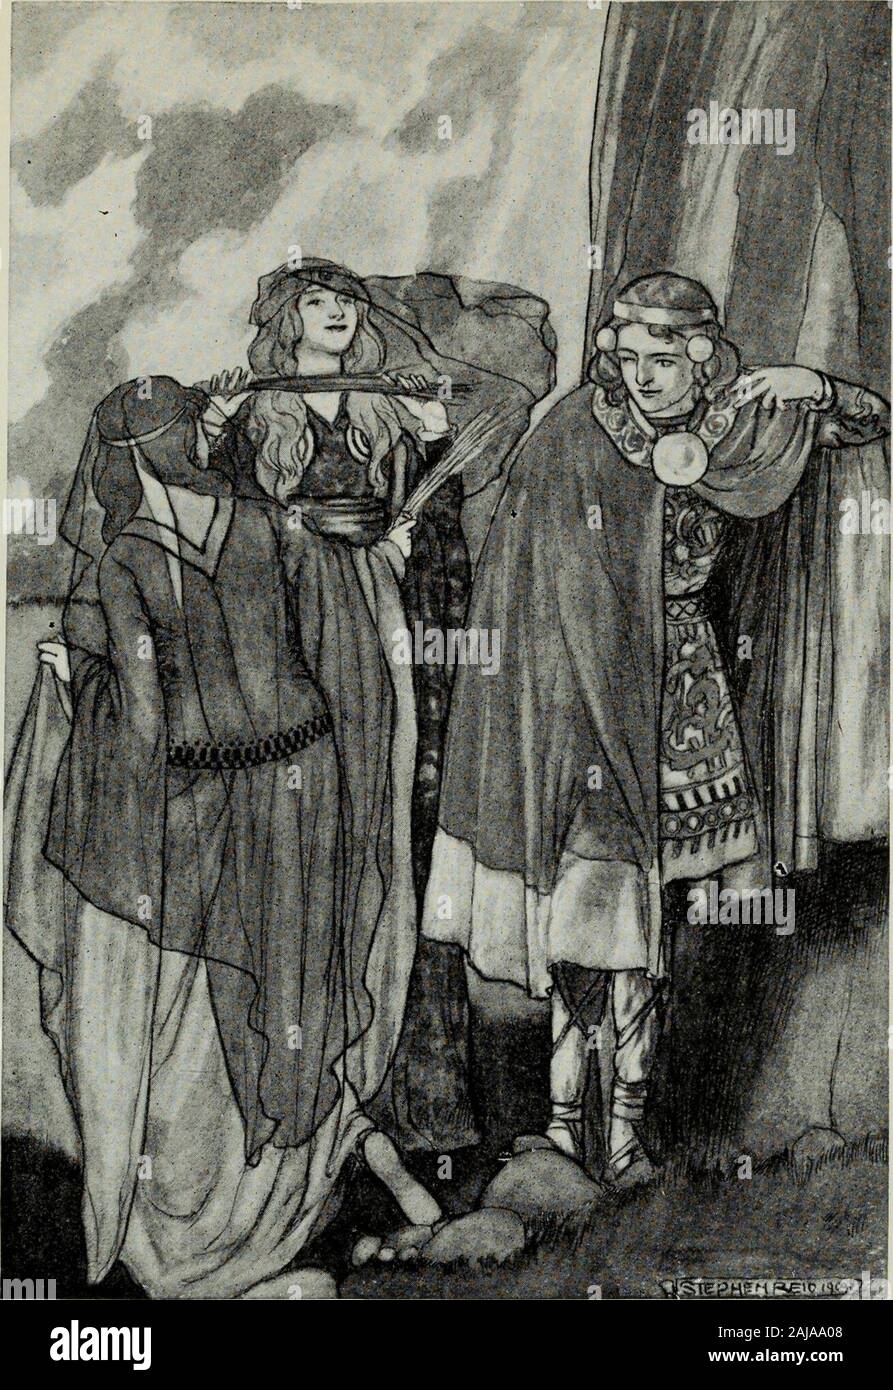 Myths and legends ; the Celtic race . cried Fergus. Cuchulain macSualtam; and now do thou avoid me as thou artpledged. I have promised even that, said Fergus, and thenwent out of the battle, and with him the men of Leinsterand the men of Munster, leaving Maev with her sevensons and the hosting of Connacht alone. ^ The sword of Fergus was a fairy weapon called the Caladcholg(hard dinter), a name of which Arthurs more famous Excaliburis a Latinised corruption, • The reference is to Deirdre. • Sec p. 211. »24. Cuchulain and the Fairy Maidens 224 CUCHULAIN IN FAIRYLANDIt was midday when Cuchulain Stock Photo